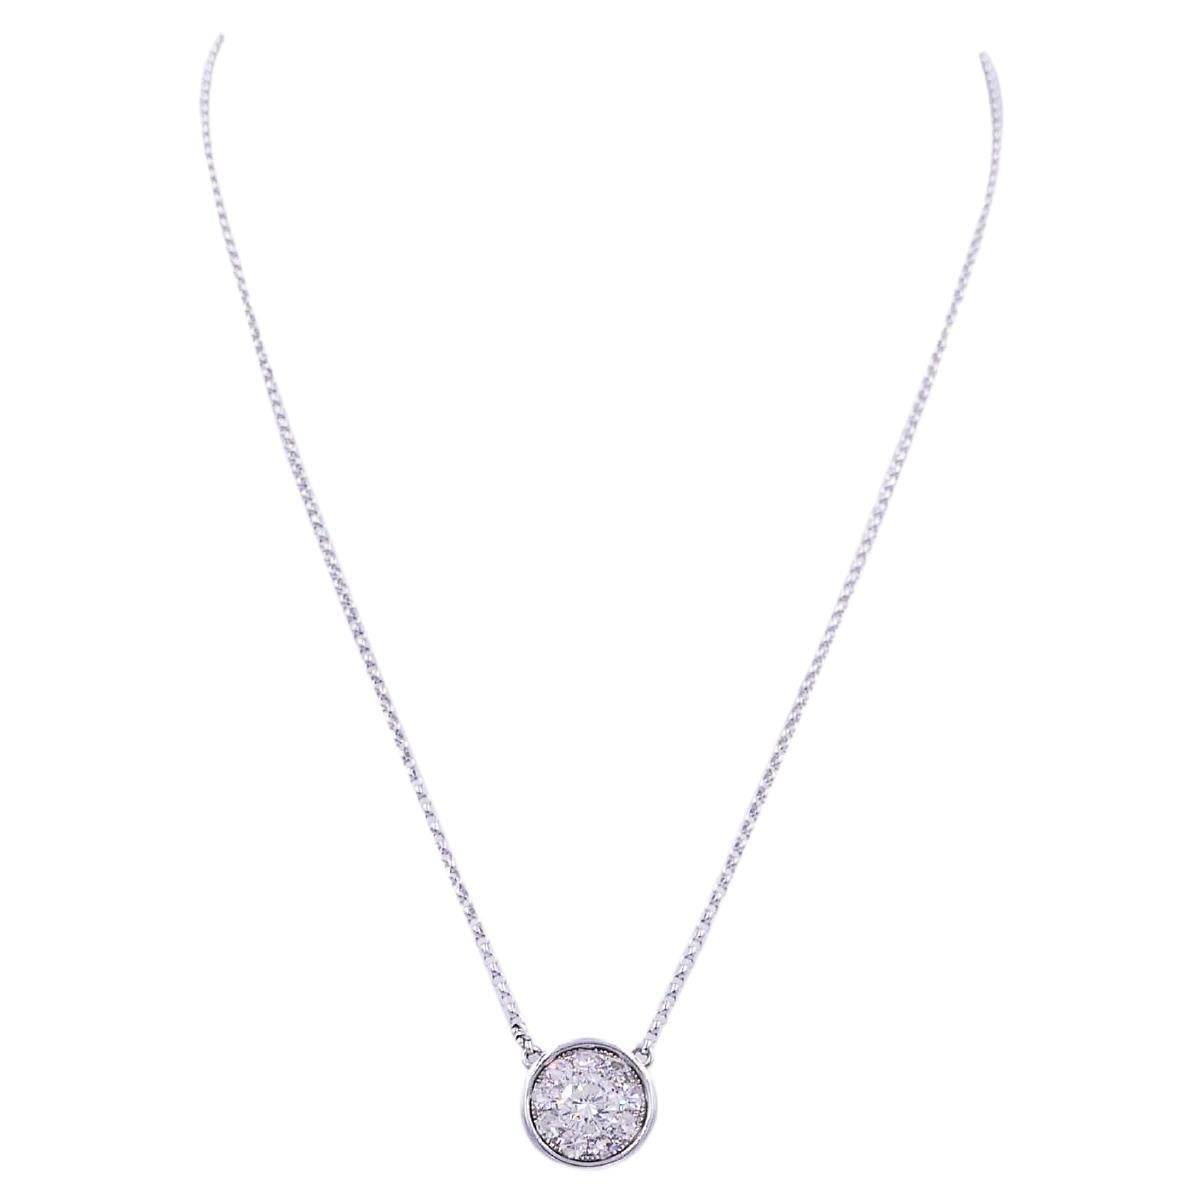 14 Karat White Gold
0.50 cts Diamonds, G Color / VS Quality
16 inches dainty cable chain